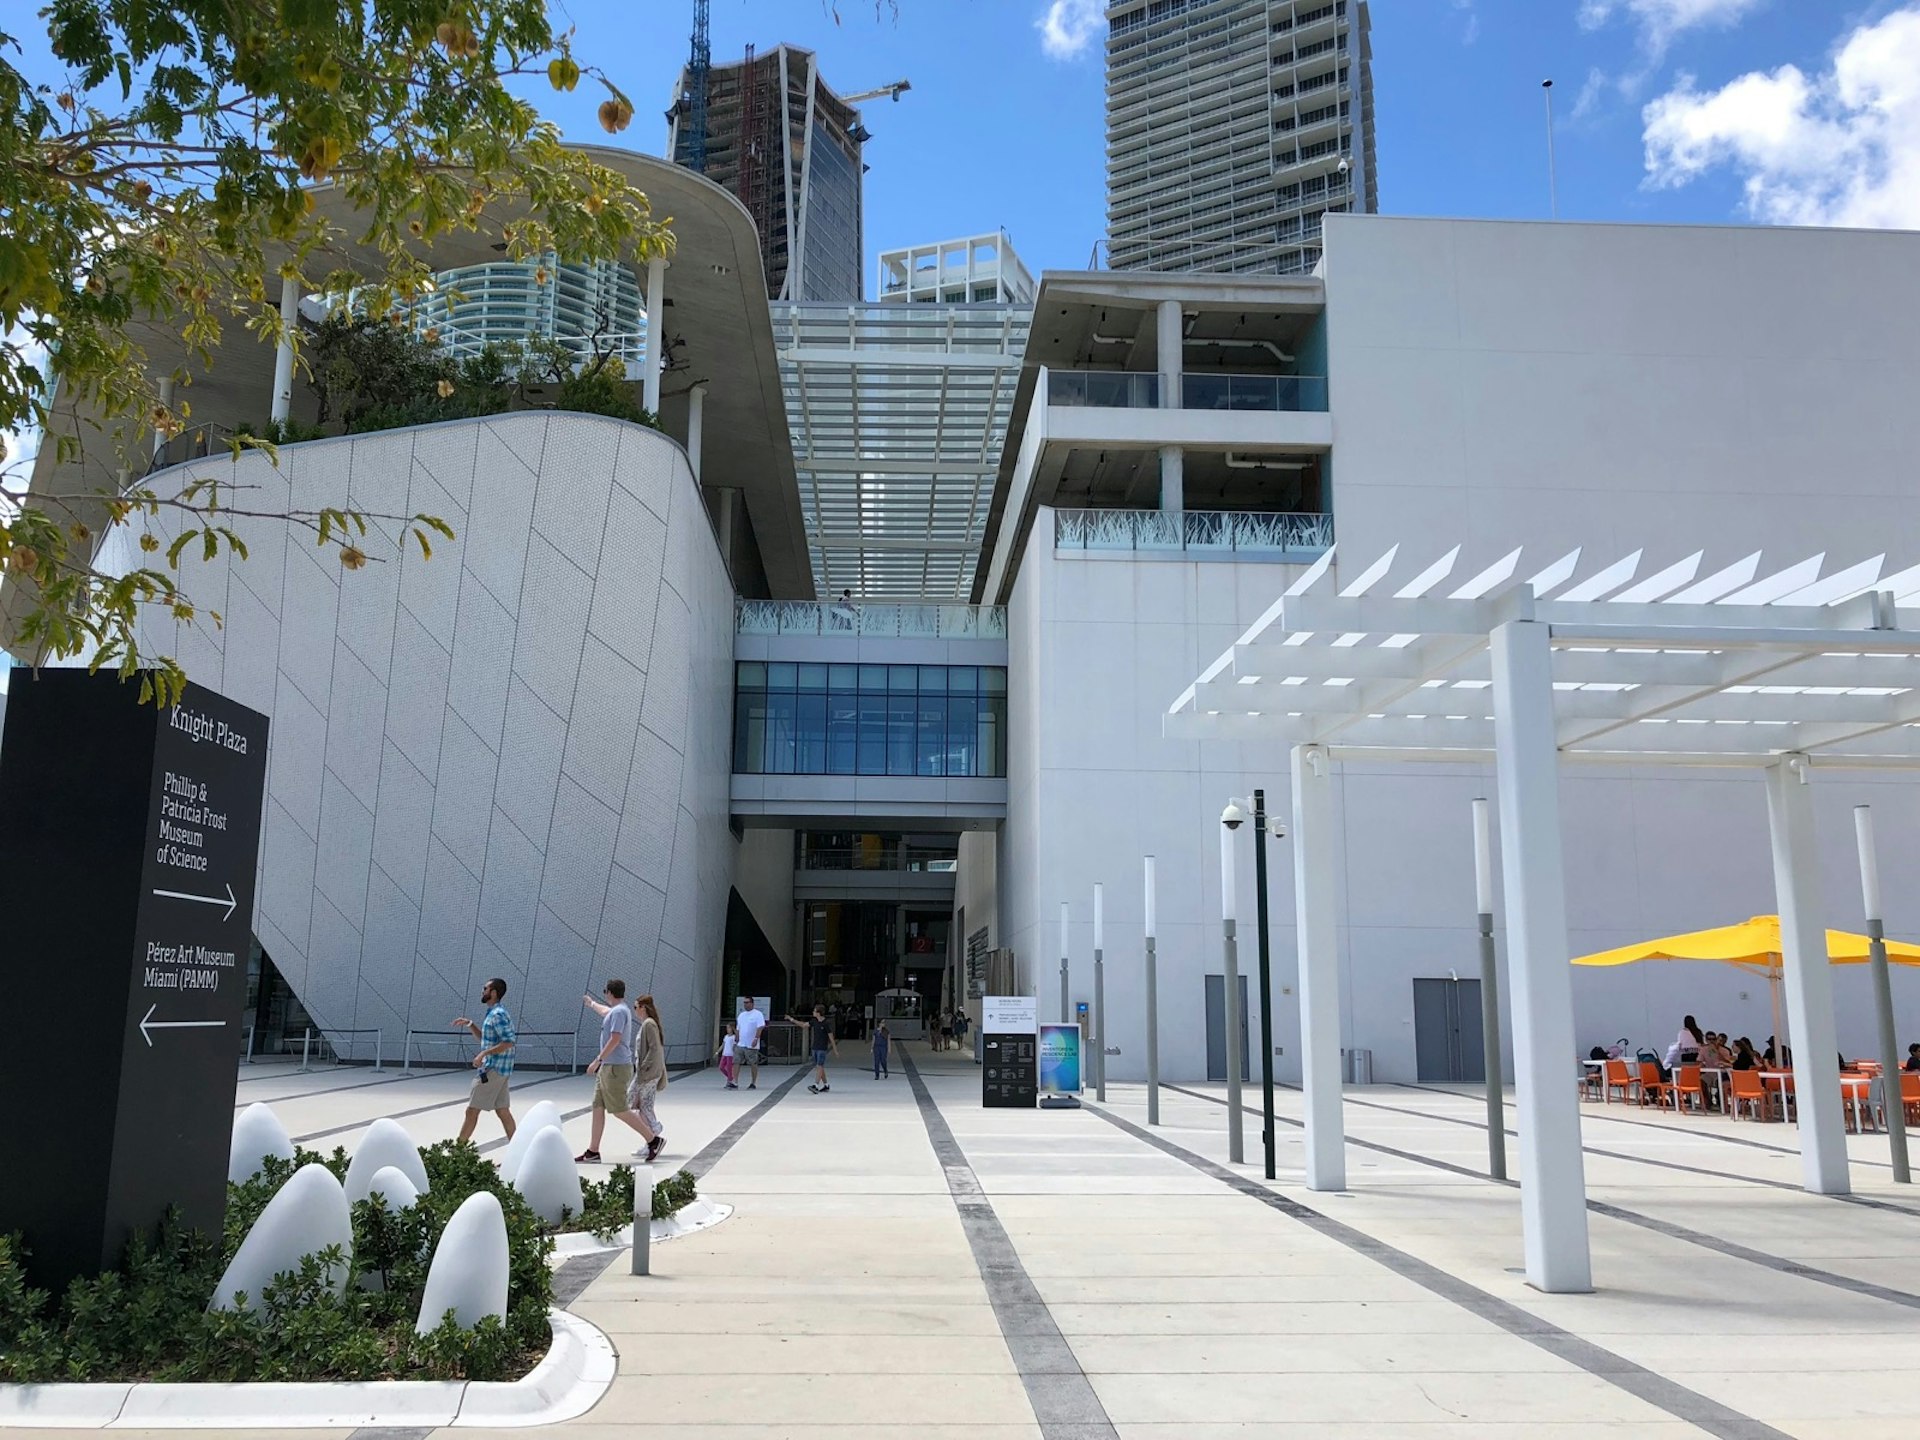 People walk in front of a stark white multi-story art-deco building with a white pergola and glass entrance. Weekend in Miami